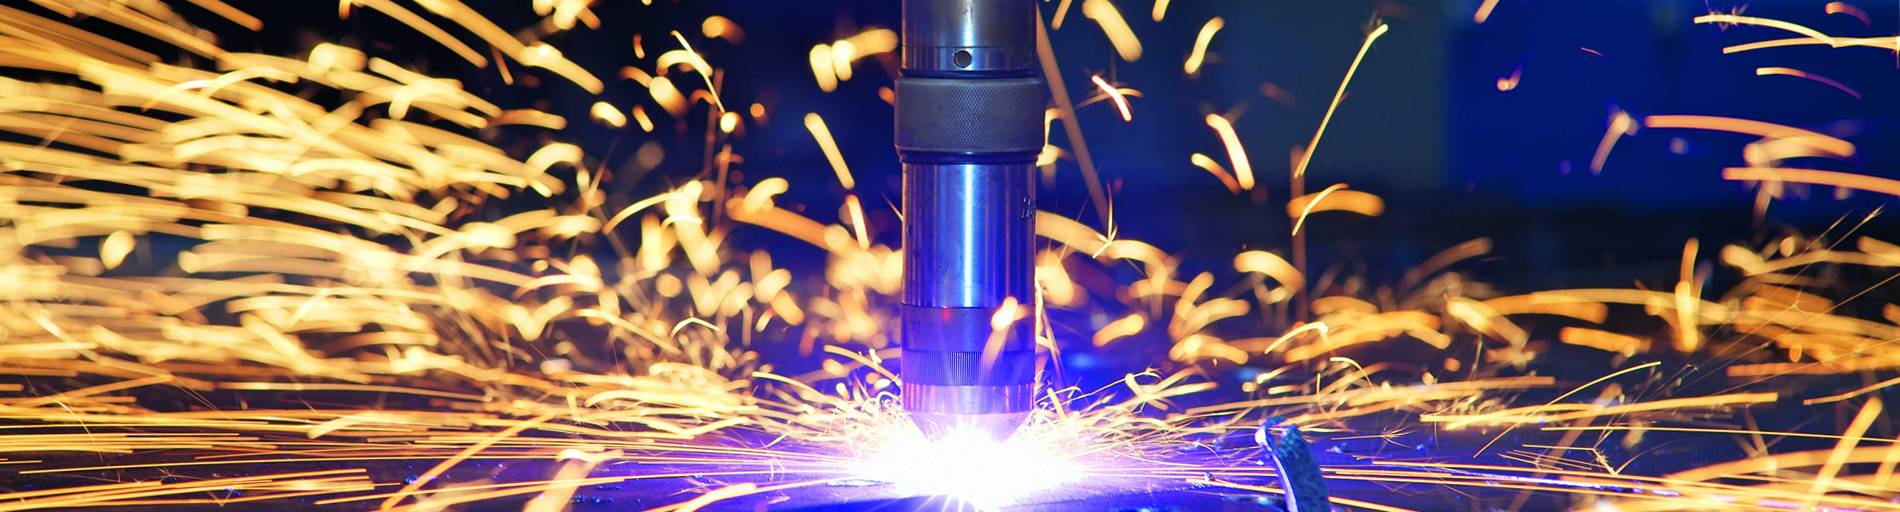 <h2>Metal Fabrication</h2><br/> TAC Industries, Inc. was incorporated and started in 1975. TAC provides a wide range of metal fabrication services to fulfill customer requirements. Dedicated personnel and the right equipment allow TAC Industries to produce quality custom fabricated products in a timely manner.